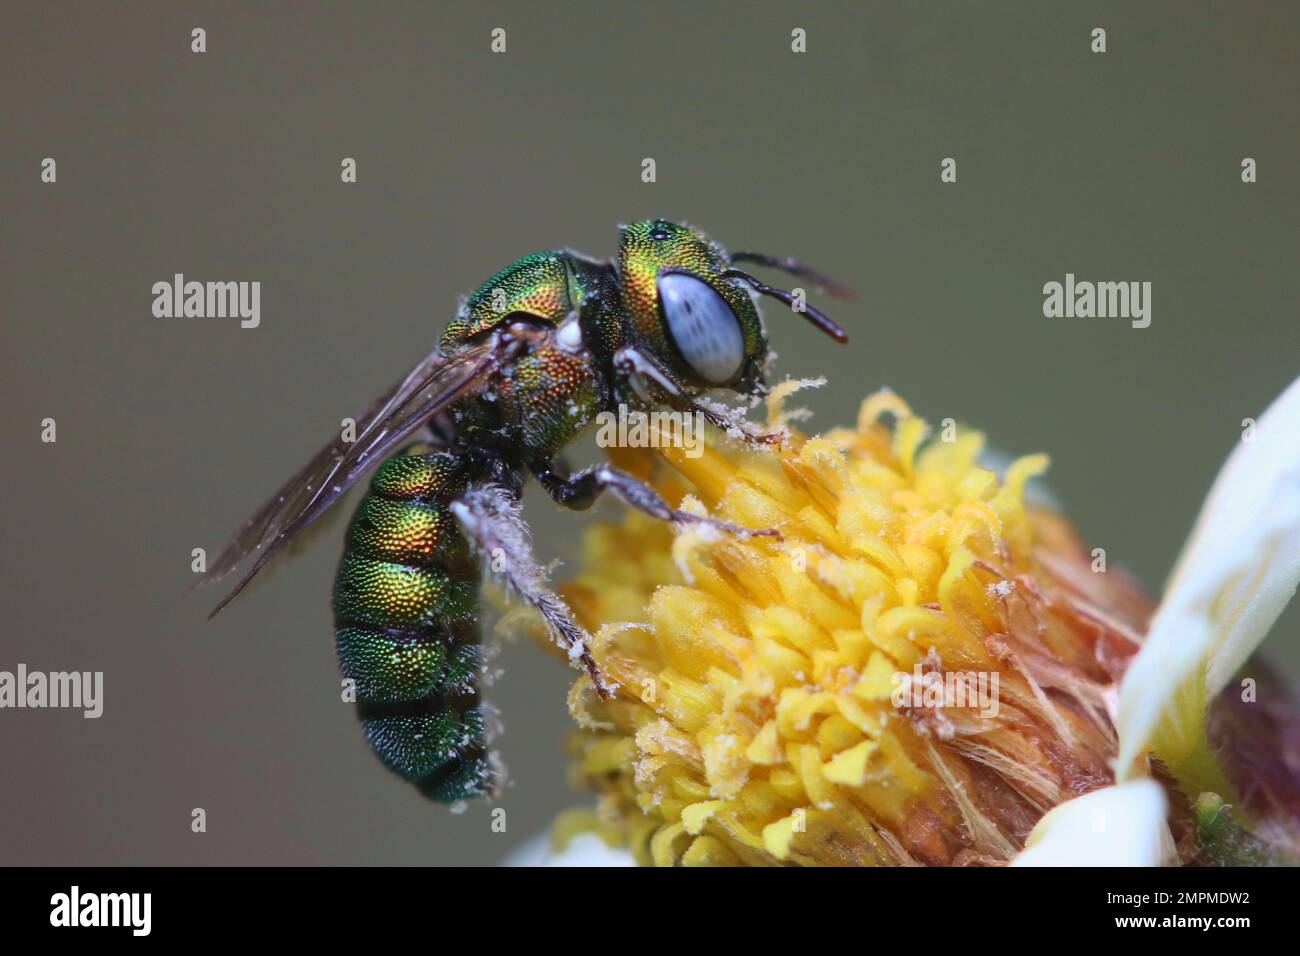 A closeup of a sweat bee on the flower Stock Photo